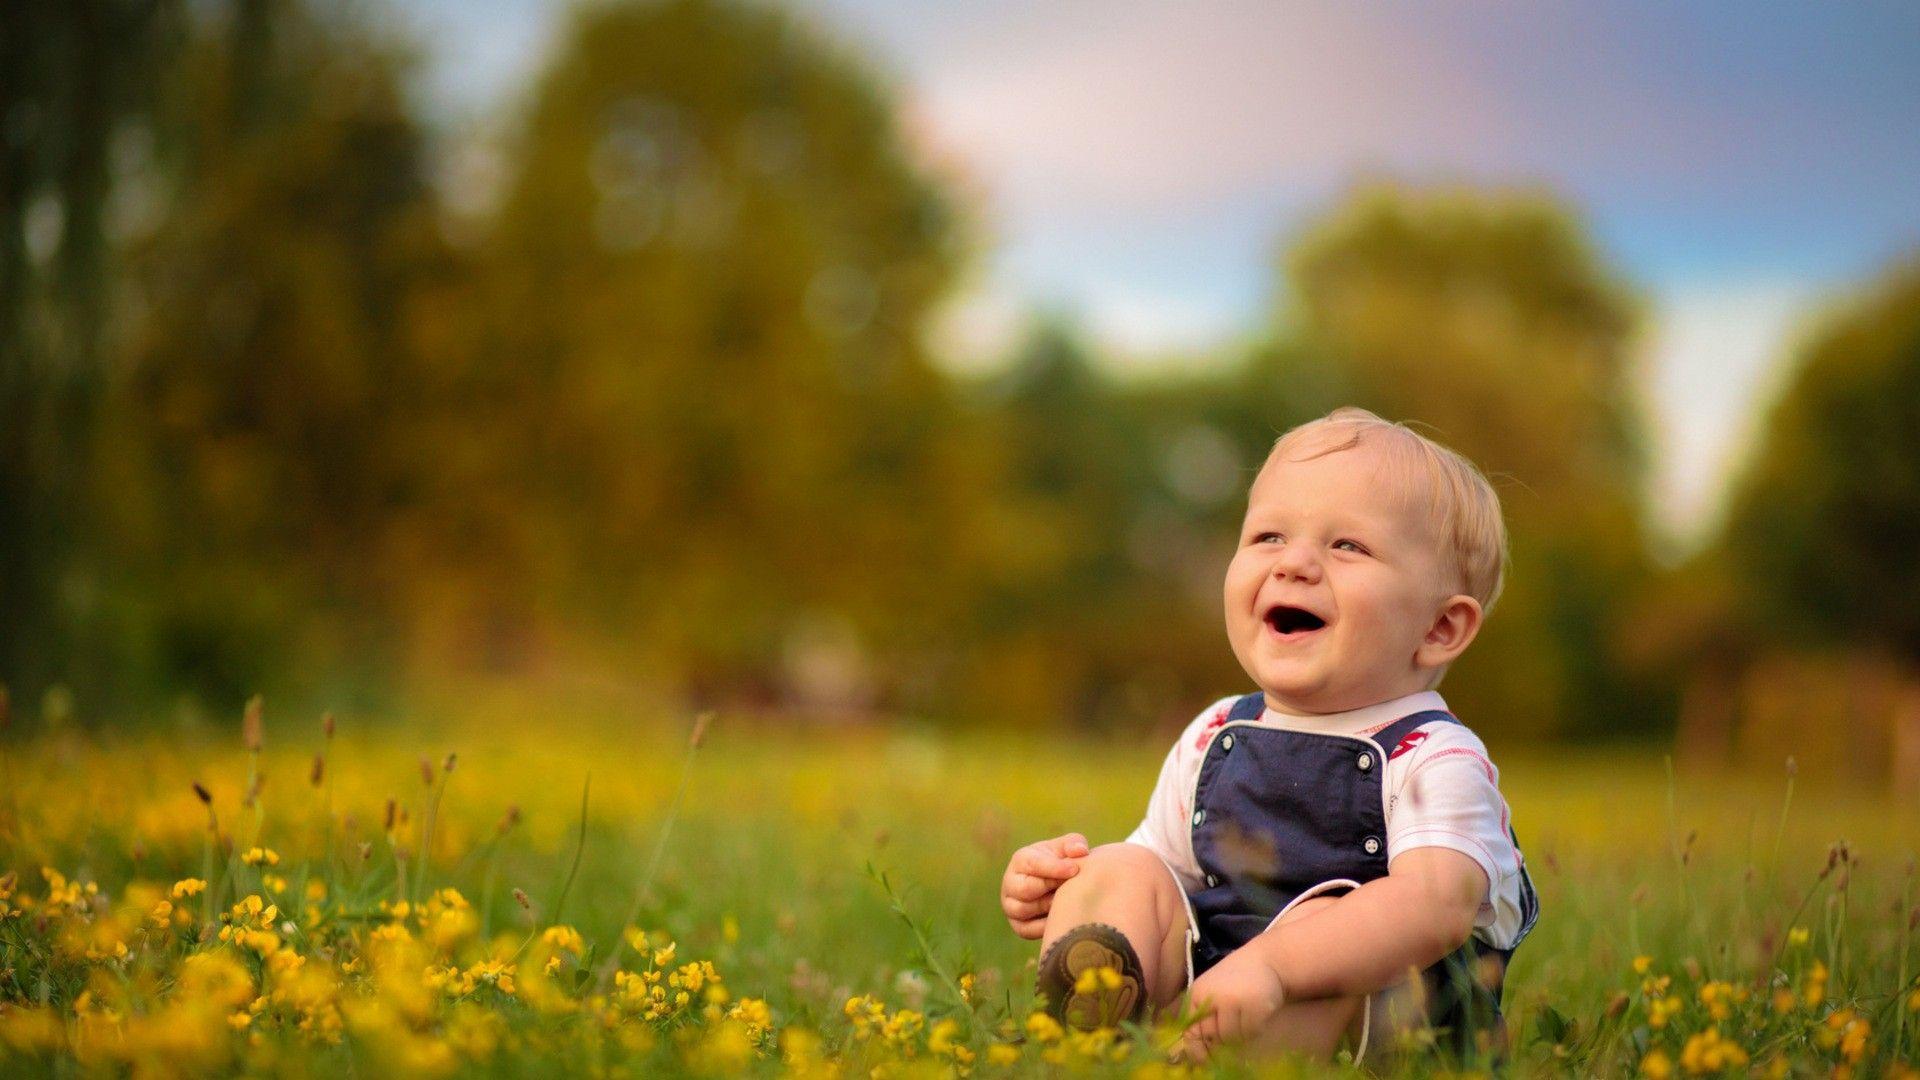 Baby Boy Laugh Smile Background Wallpaper